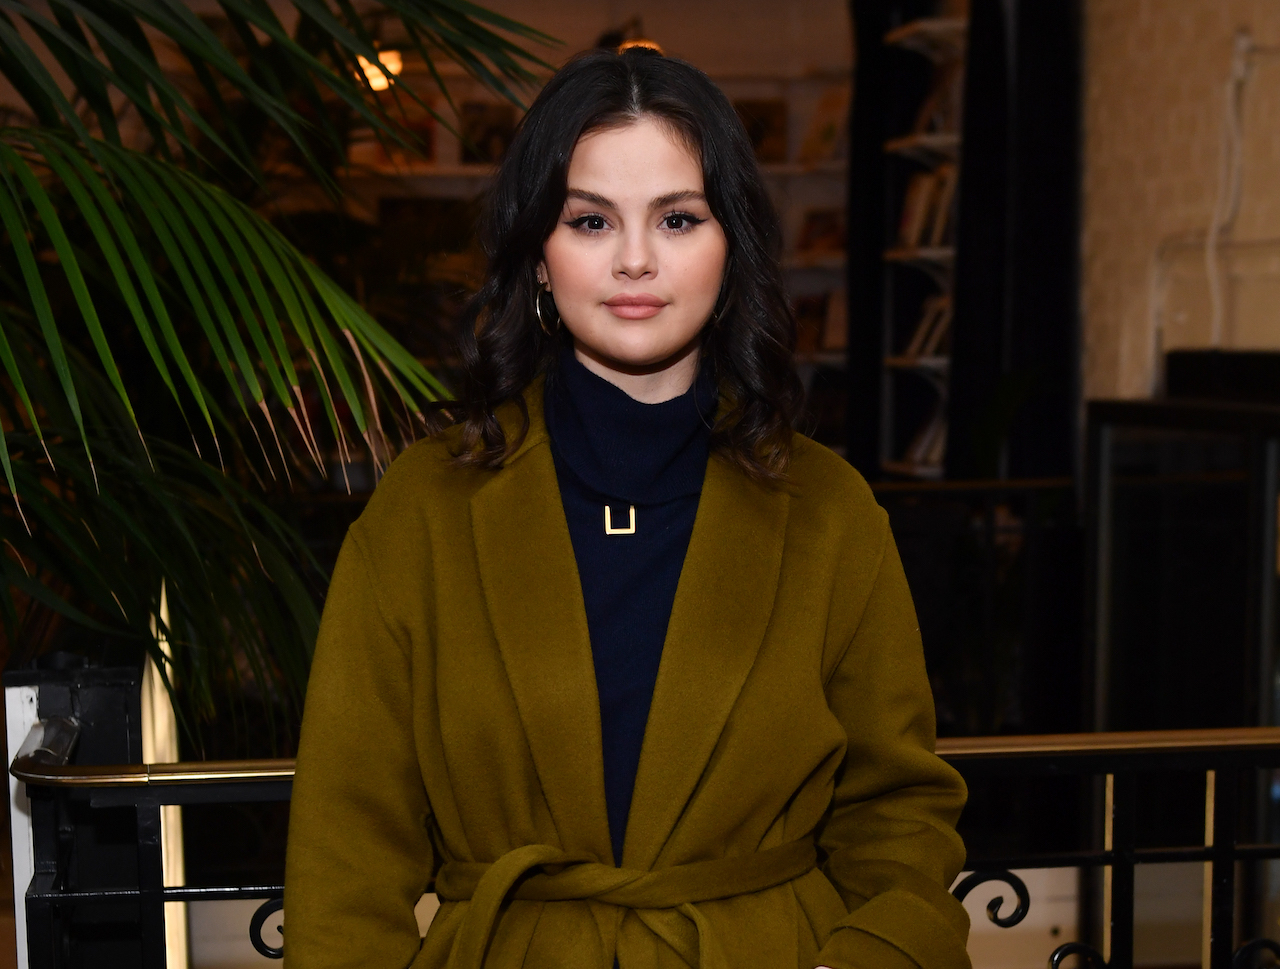 Selena Gomez May Be the New Face of Louis Vuitton